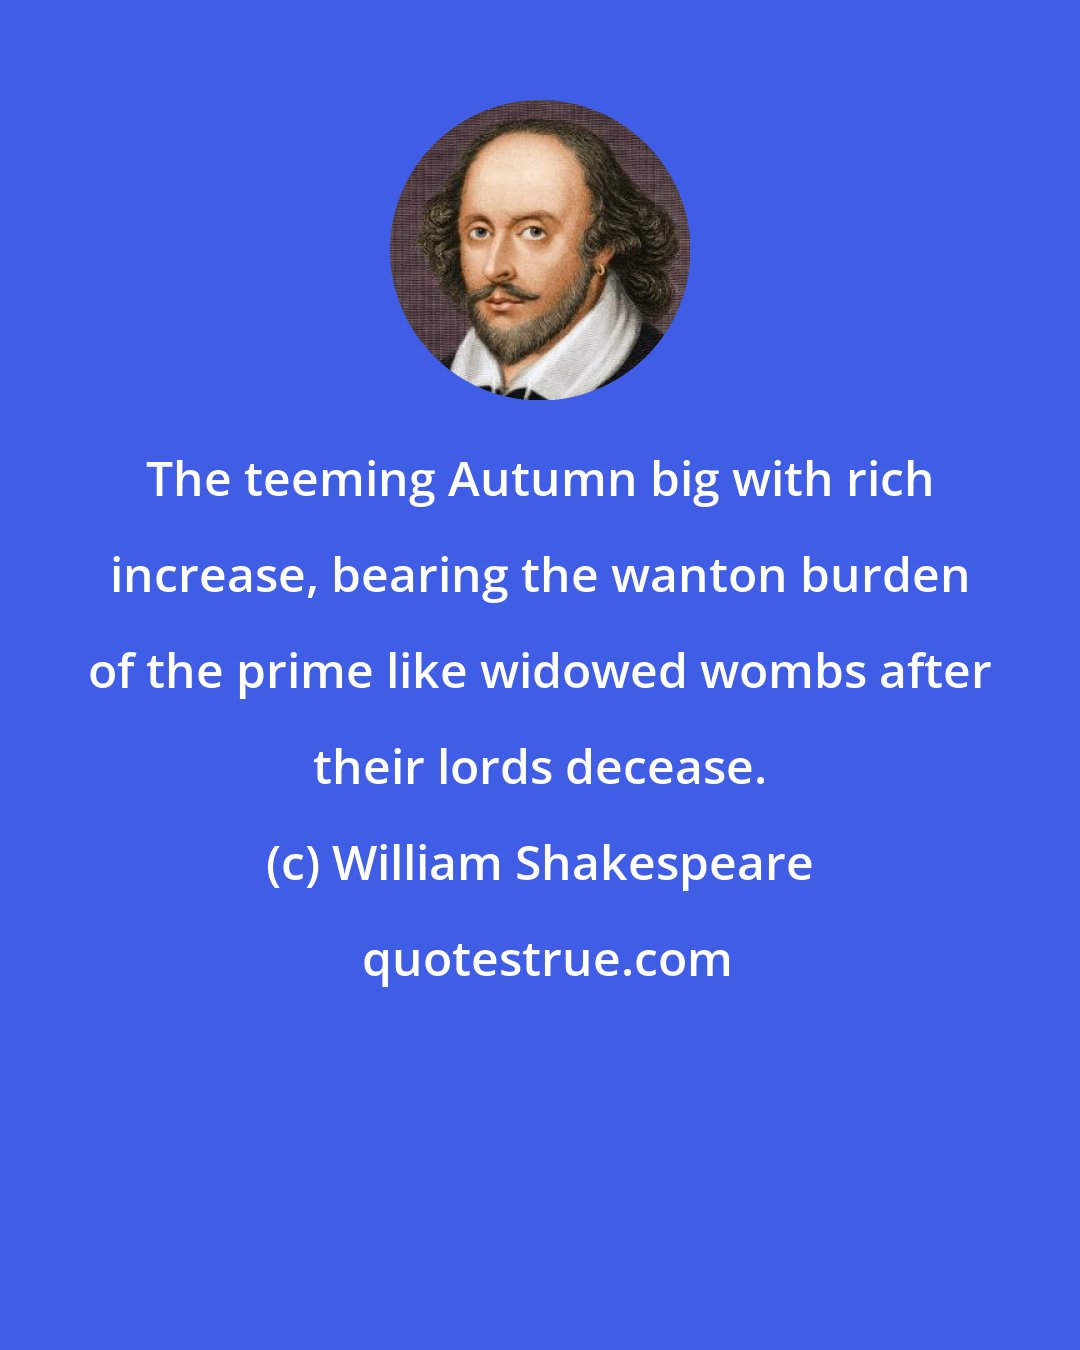 William Shakespeare: The teeming Autumn big with rich increase, bearing the wanton burden of the prime like widowed wombs after their lords decease.